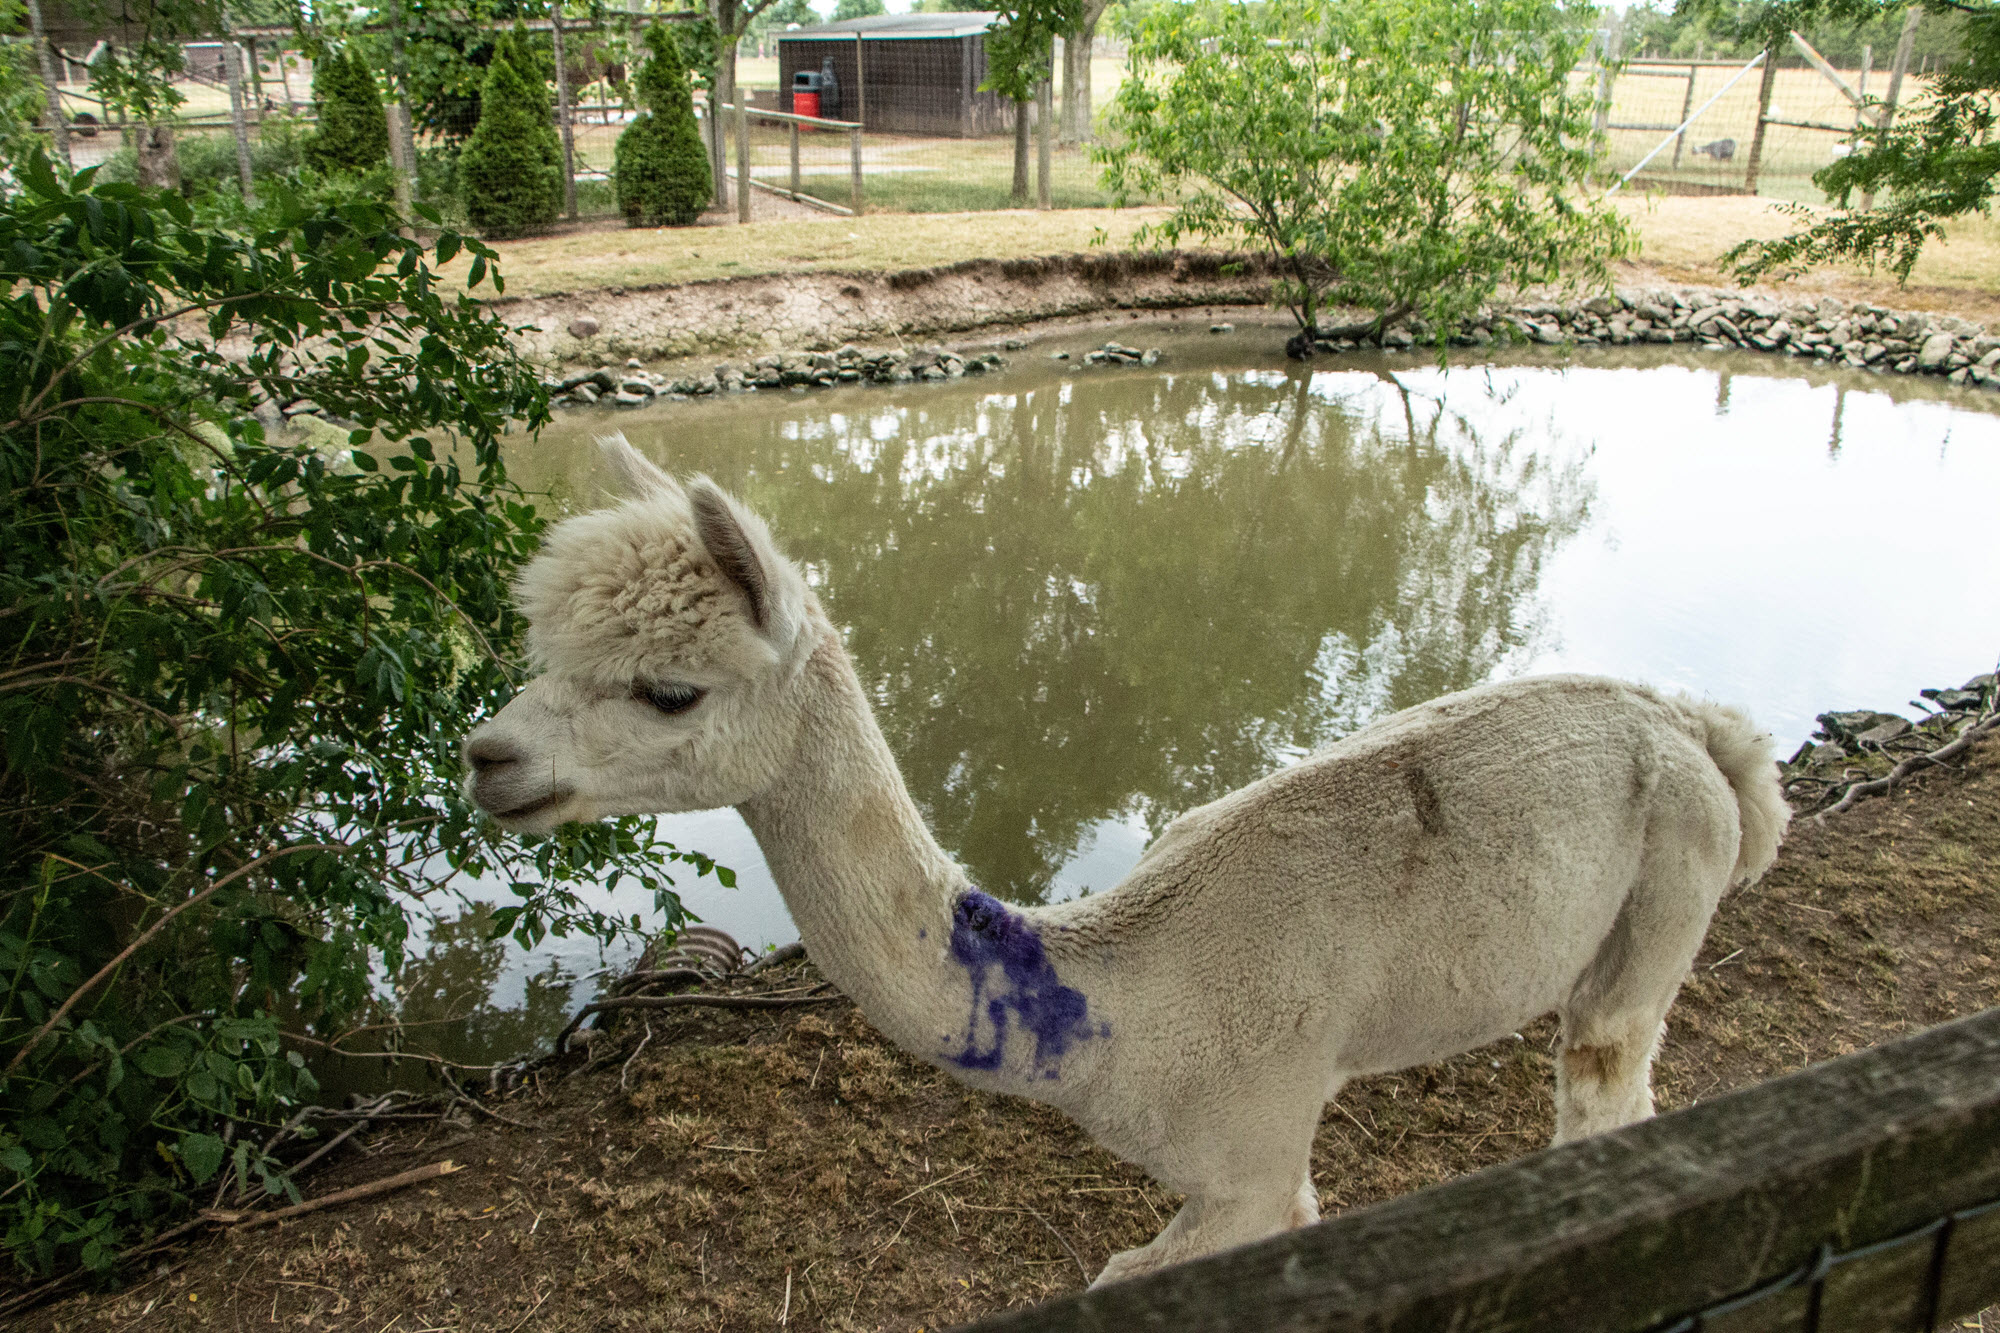 Image shows llama with topical treatment for injuries.